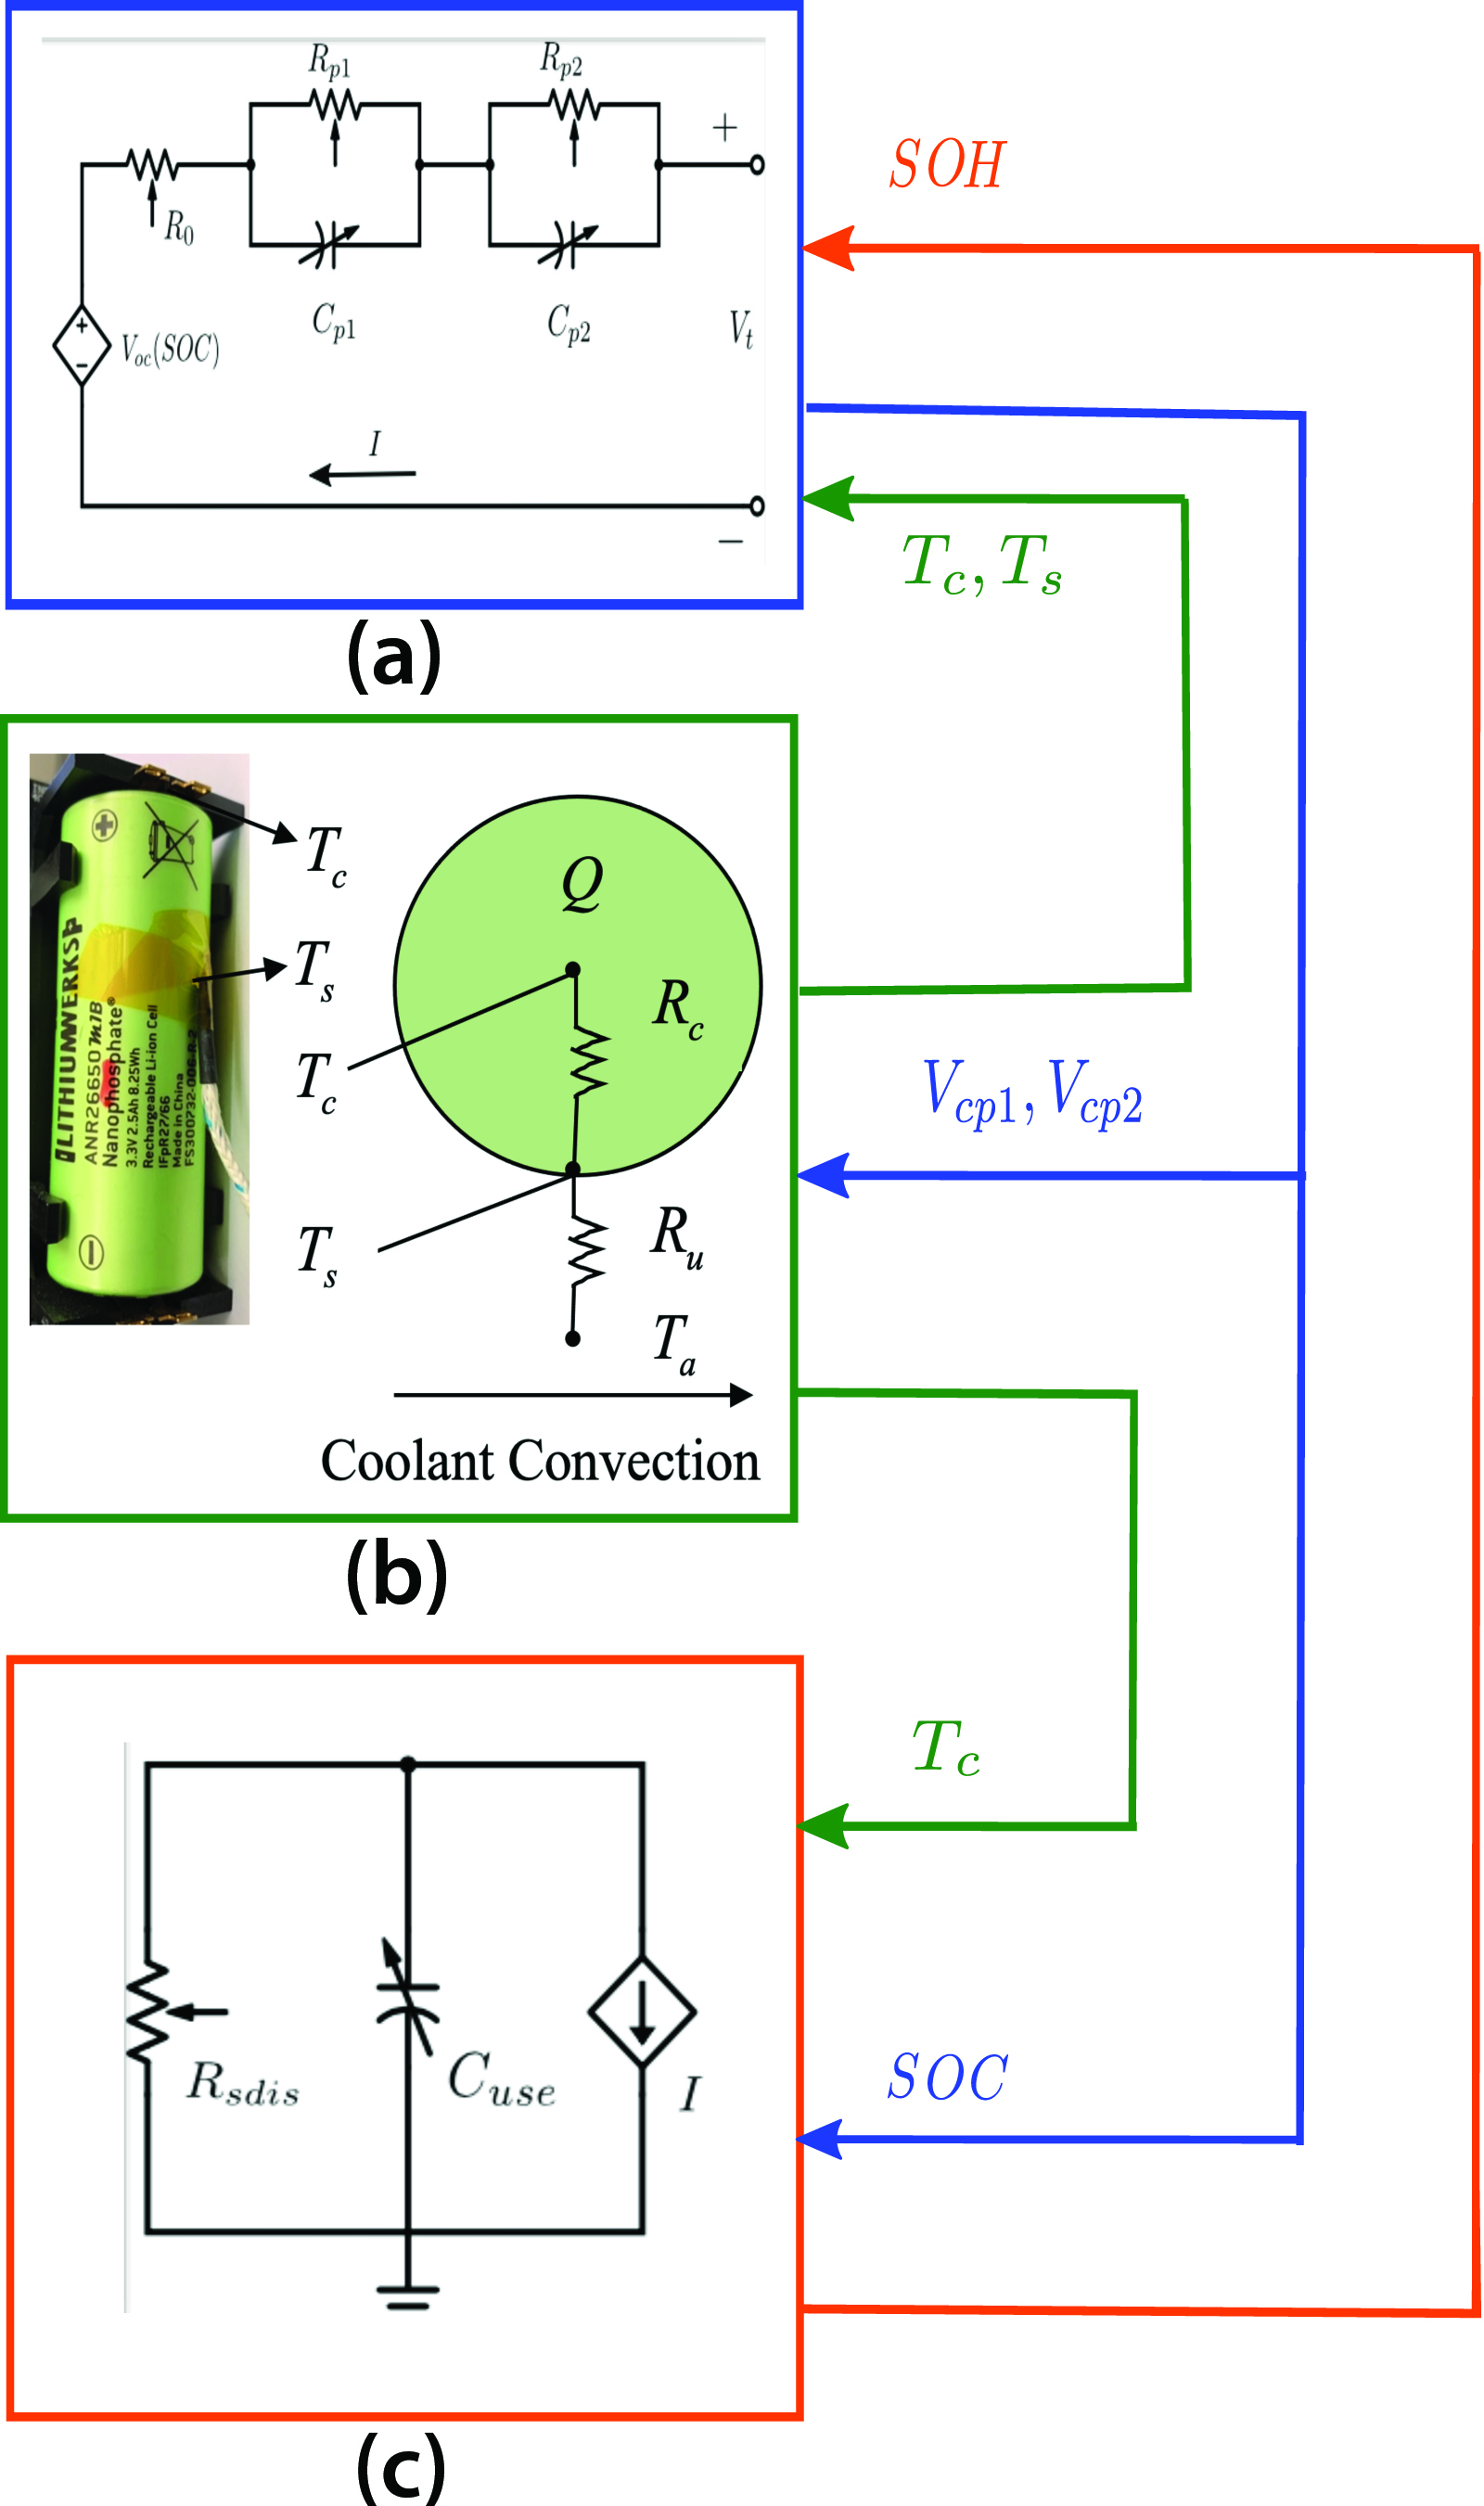 &lt;strong&gt;Figure 1.&lt;/strong&gt; State of health (SOH)-coupled model of a lithium-ion battery. &lt;strong&gt;1a.&lt;/strong&gt; Equivalent circuit model. &lt;strong&gt;1b.&lt;/strong&gt; Thermal model. &lt;strong&gt;1c.&lt;/strong&gt; Capacity fade model. Figure courtesy of Geetika Vennam.